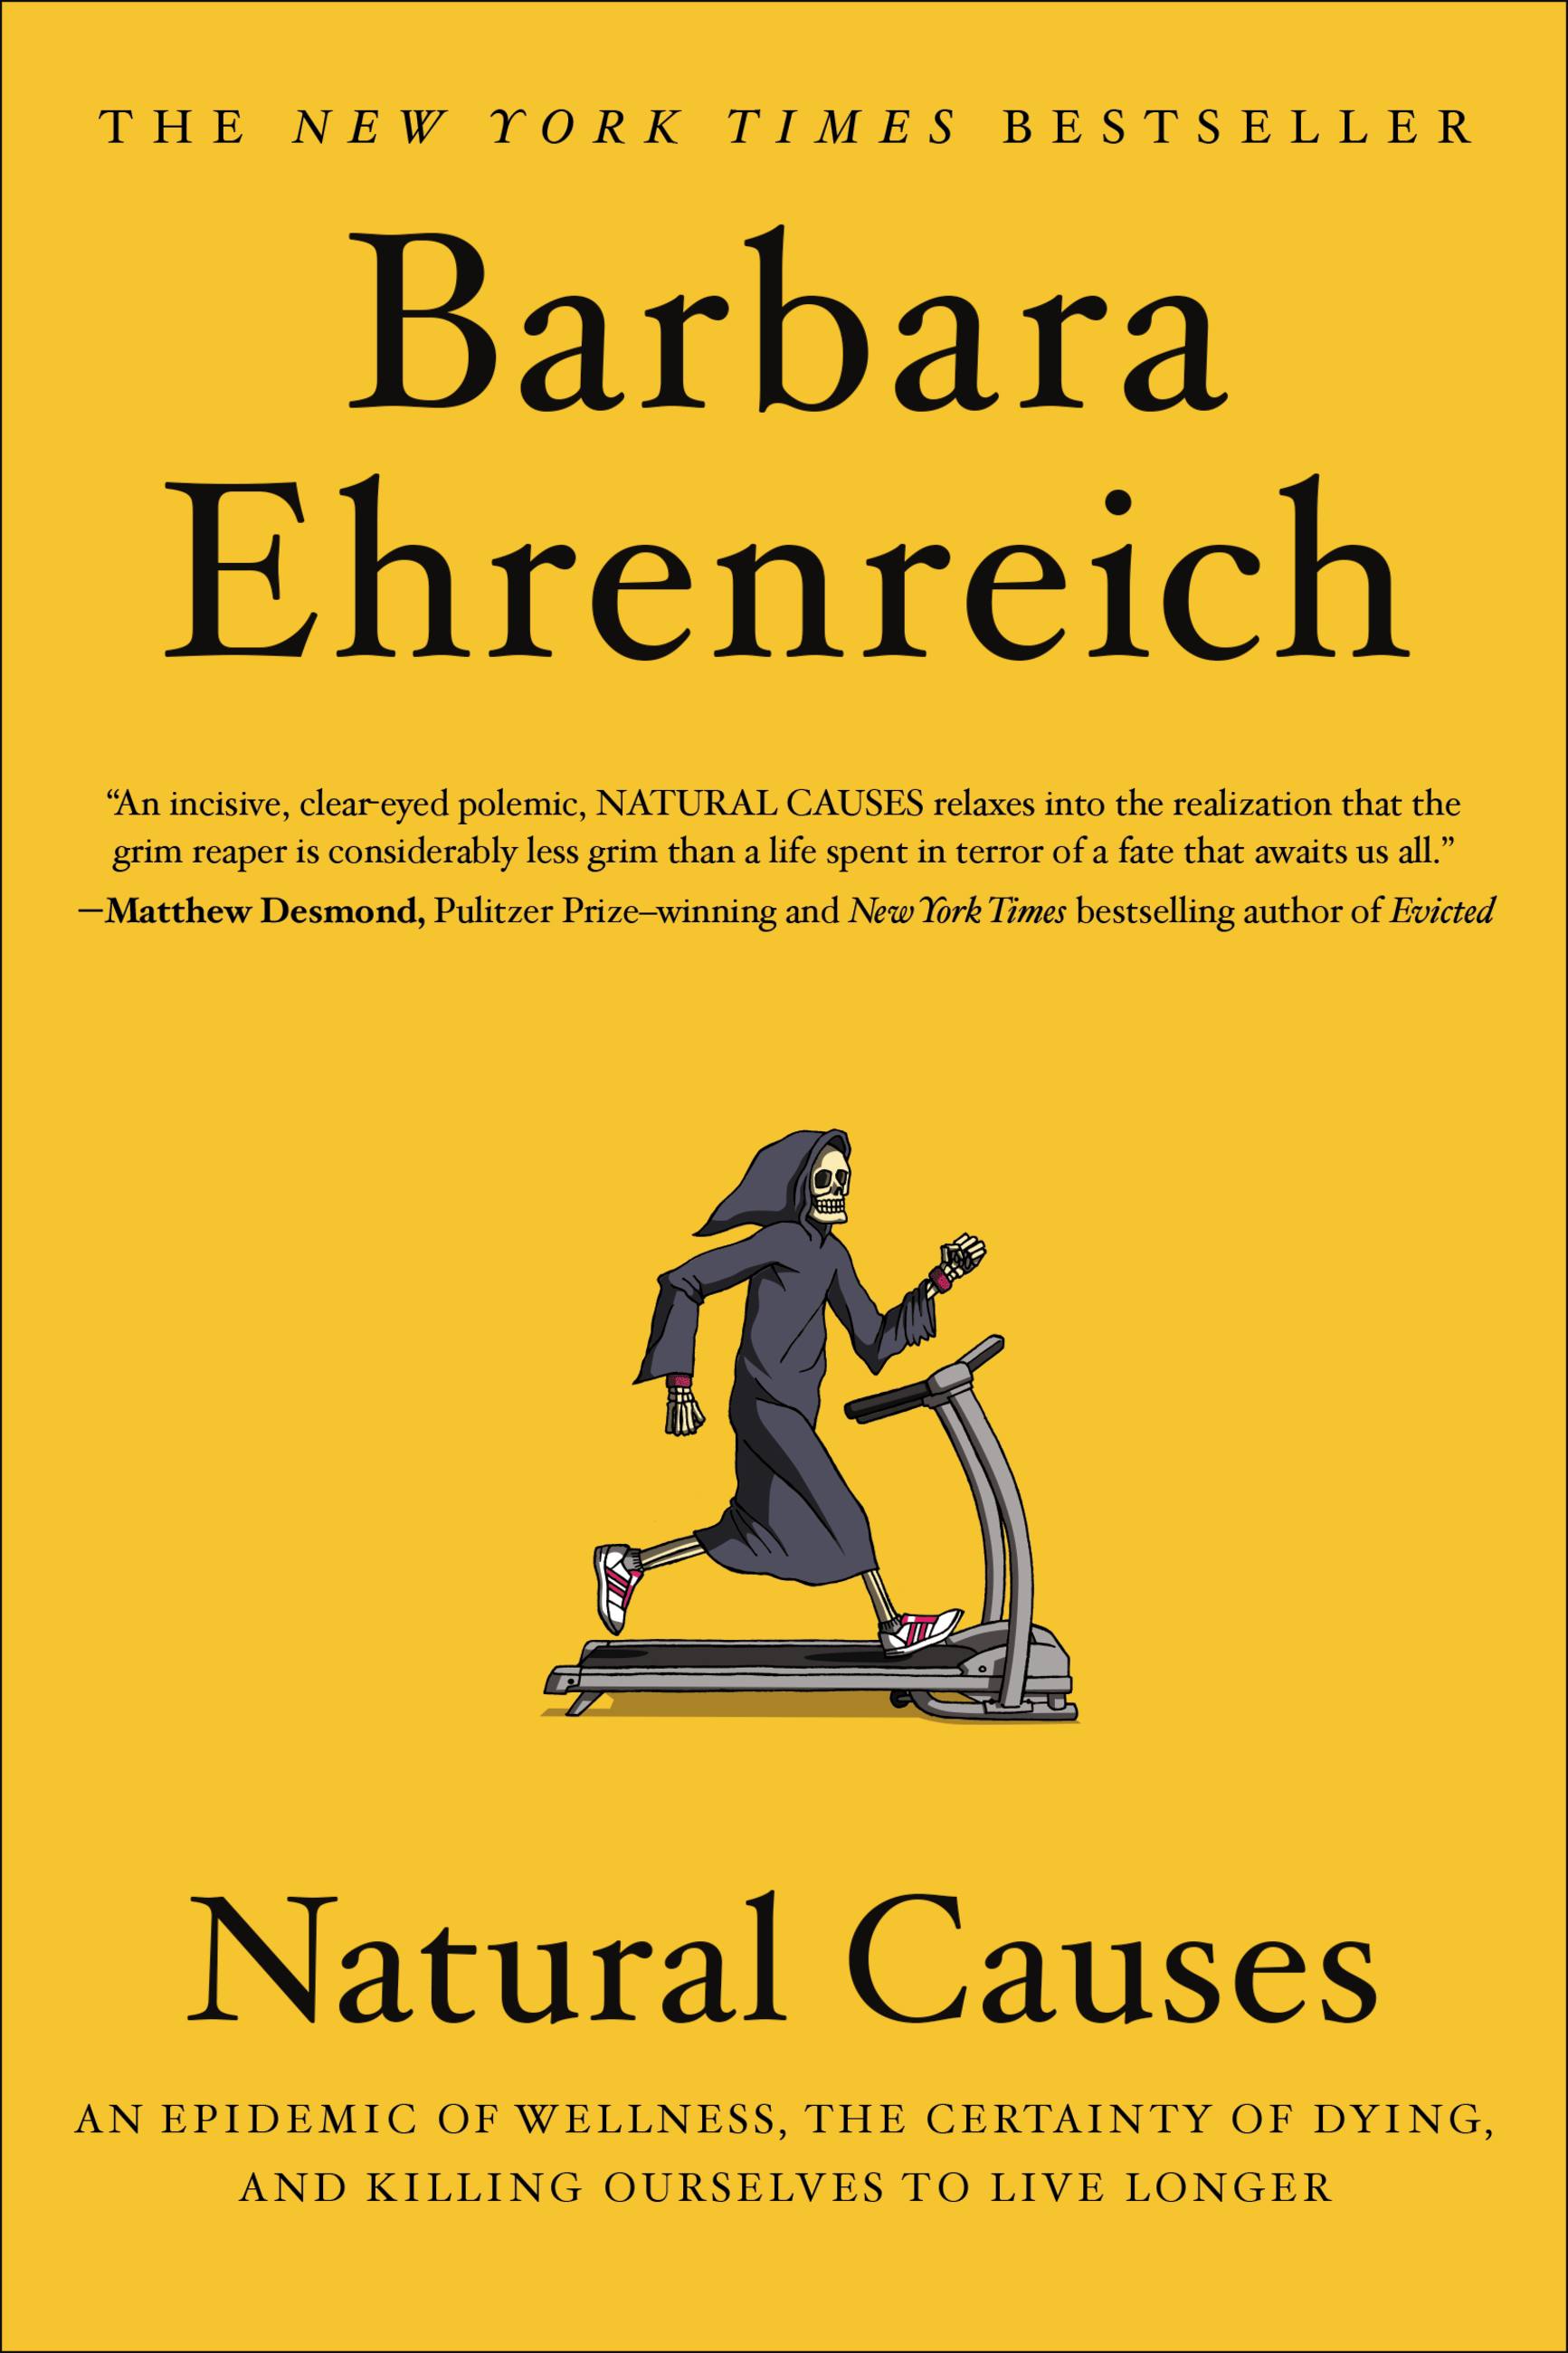 Image de couverture de Natural Causes [electronic resource] : An Epidemic of Wellness, the Certainty of Dying, and Killing Ourselves to Live Longer